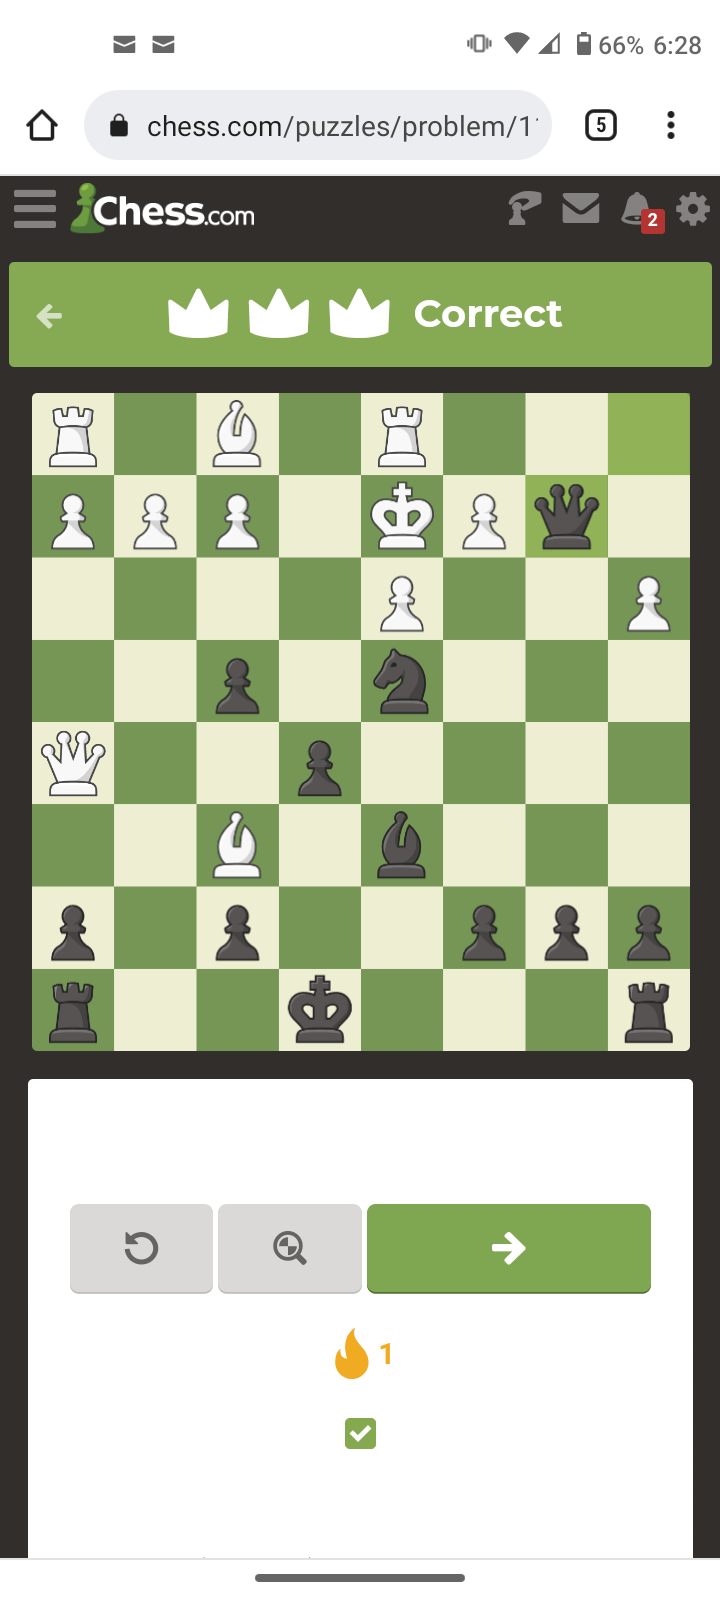 is this  puzzle correct? - Chess Forums 